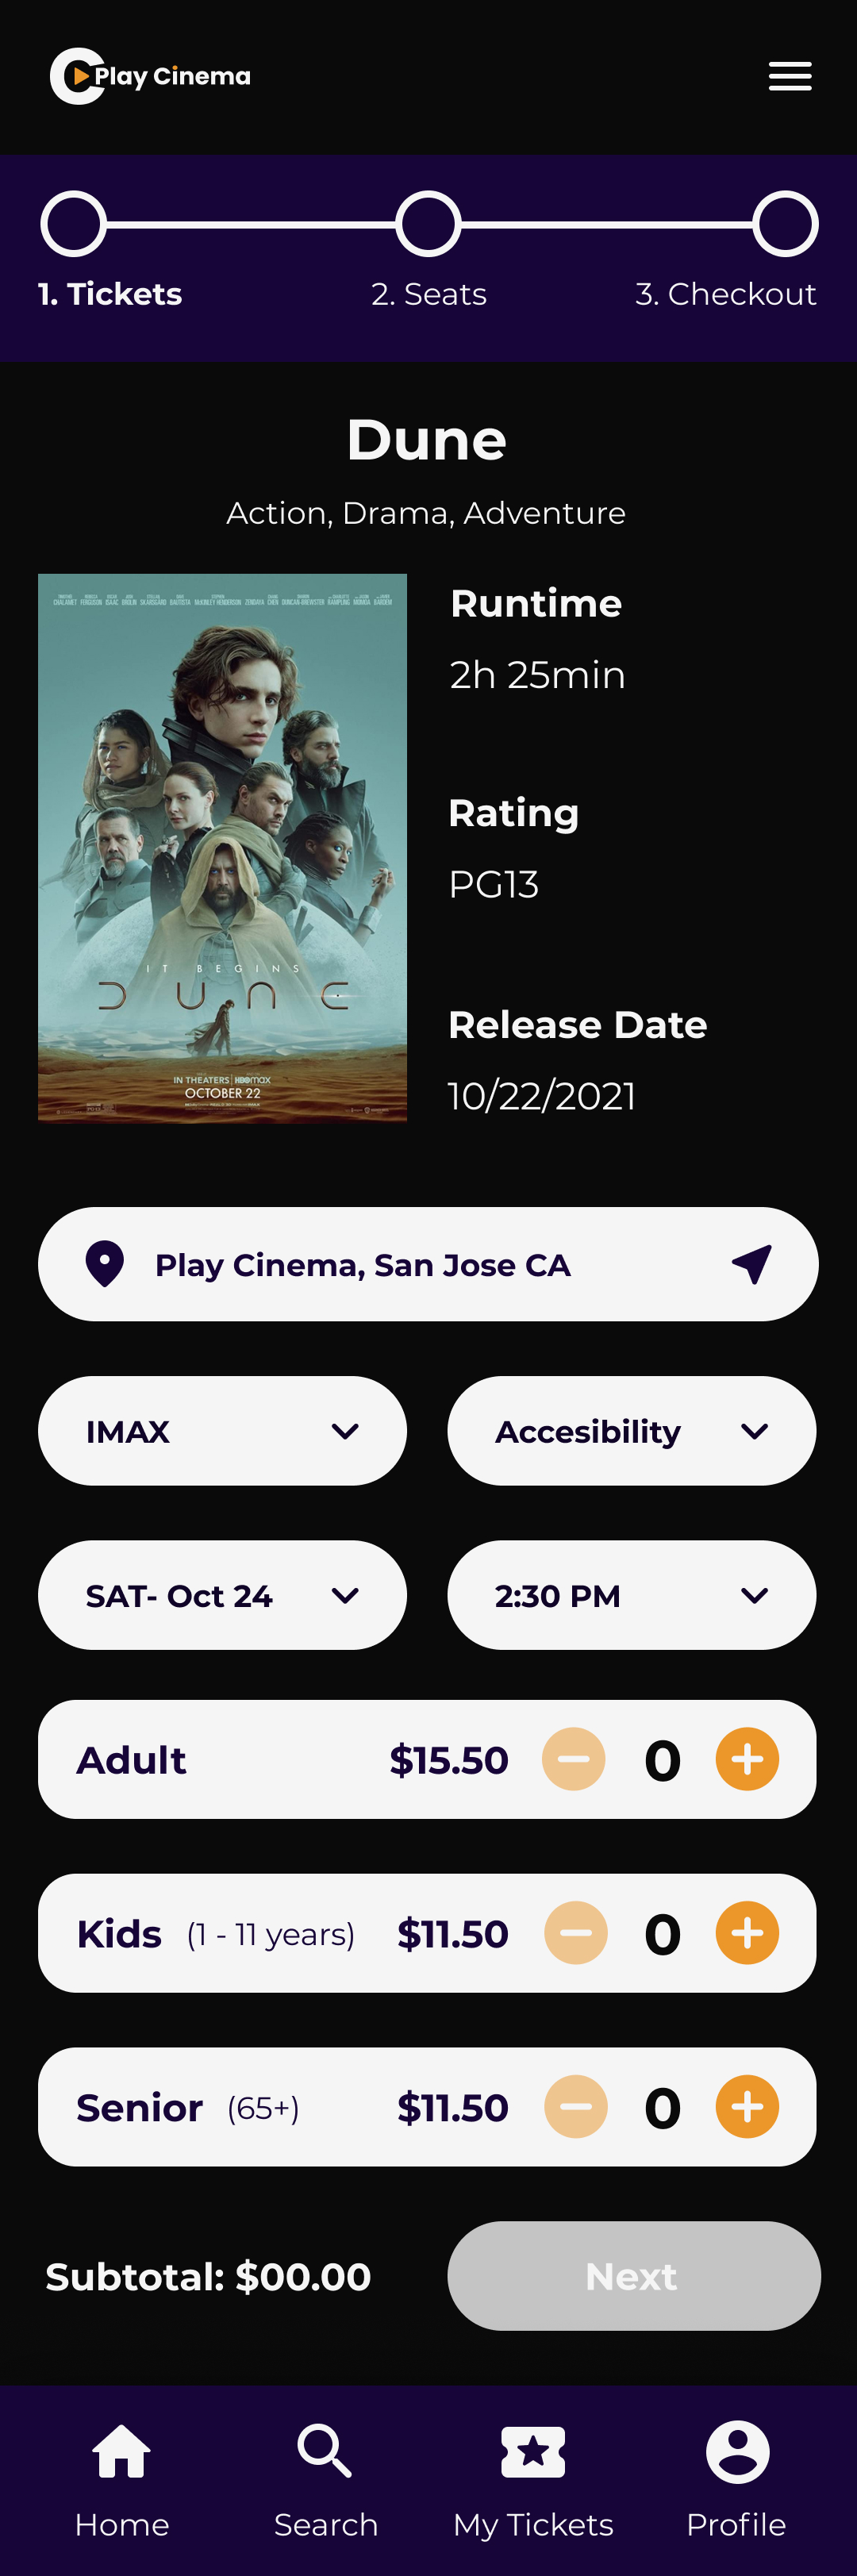 Play Cinema Tickets screen for mobile